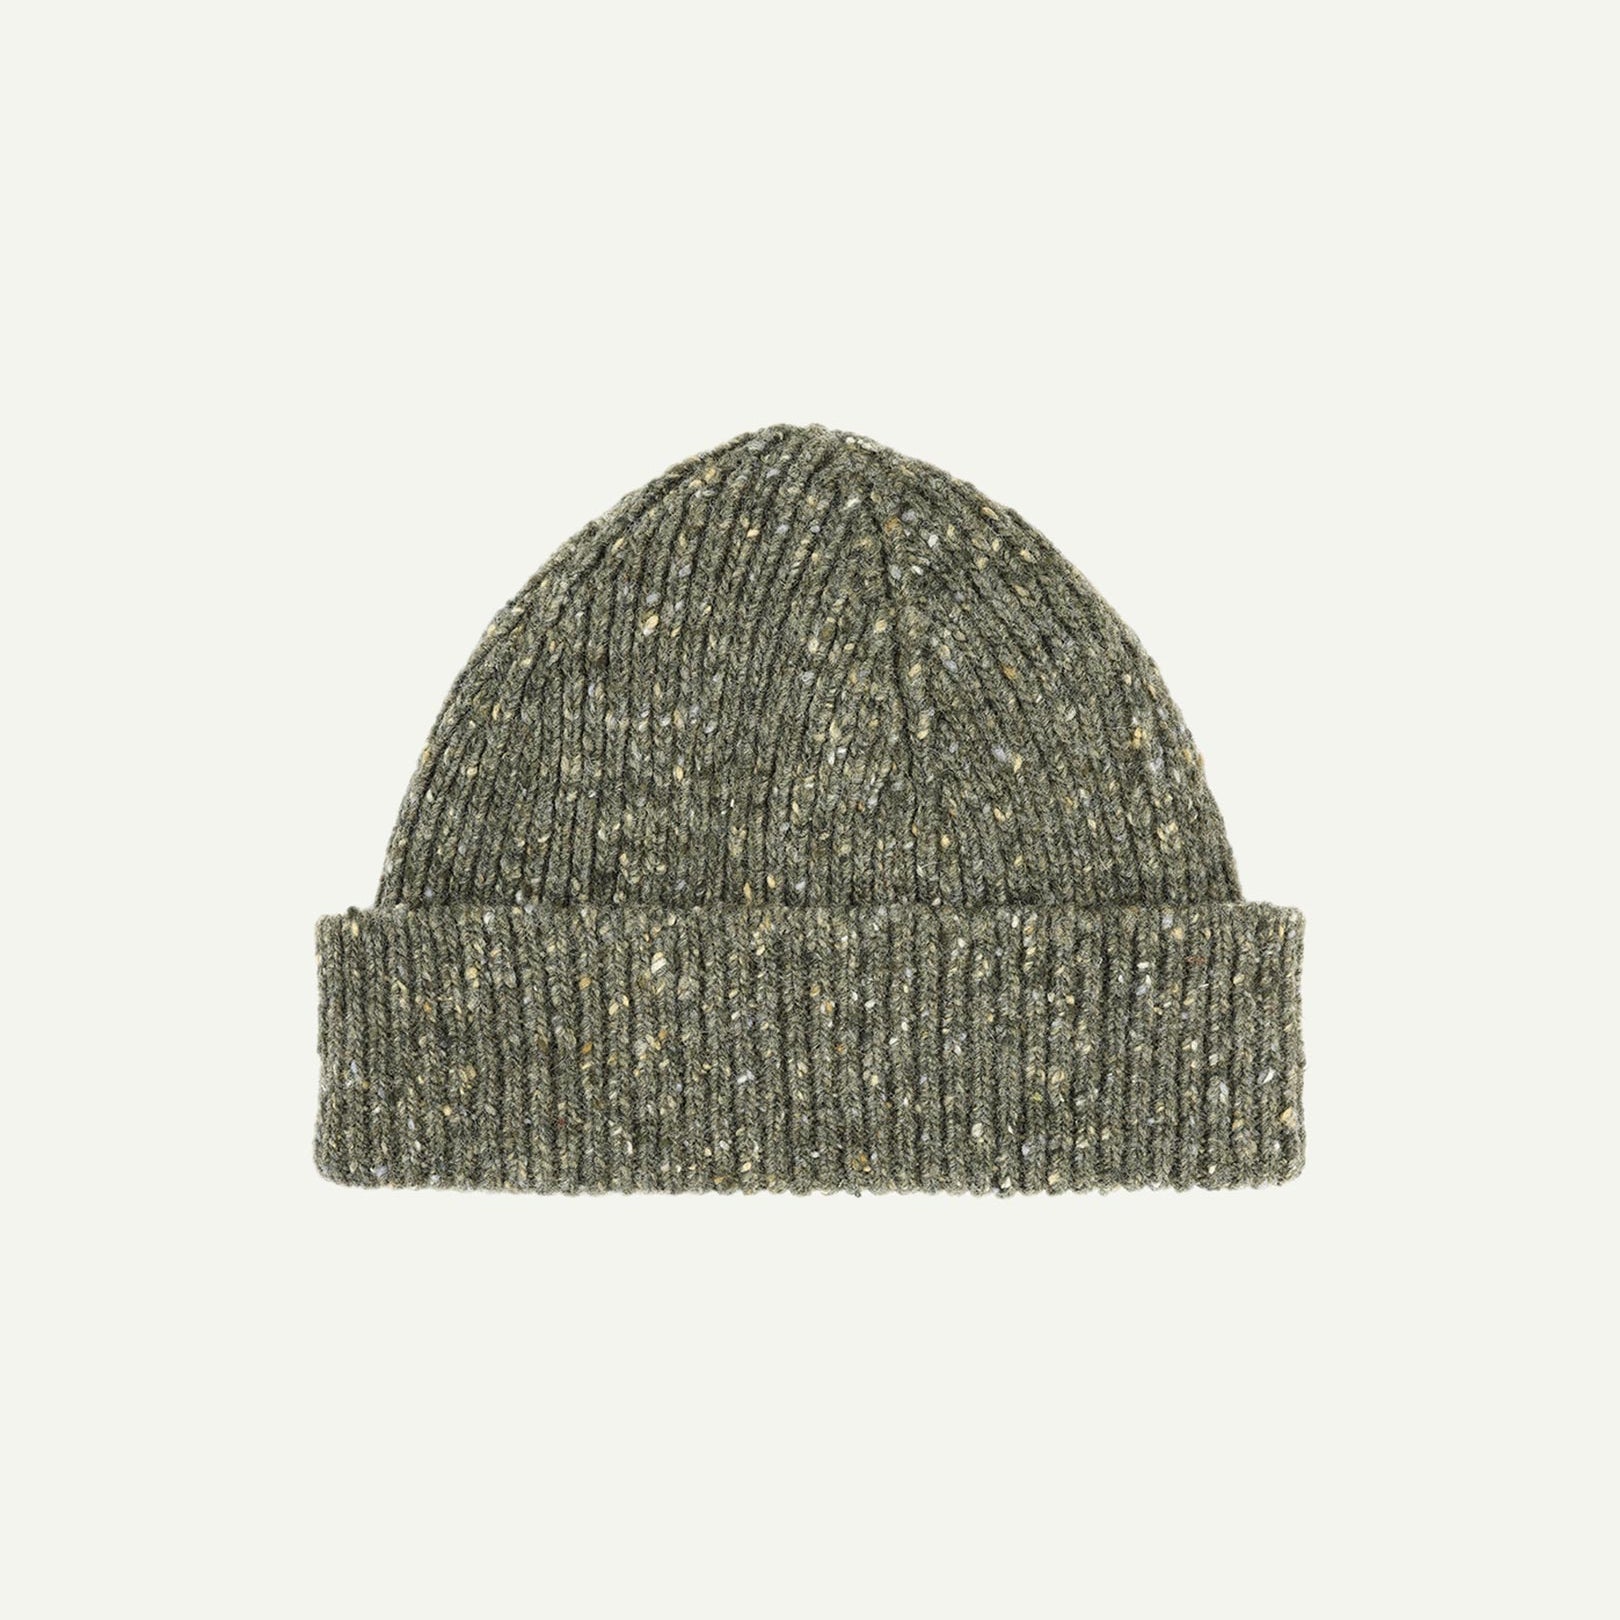  Flat view of Uskees 4003 donegal wool hat in army green, with a clear view of the adjustable cuff.